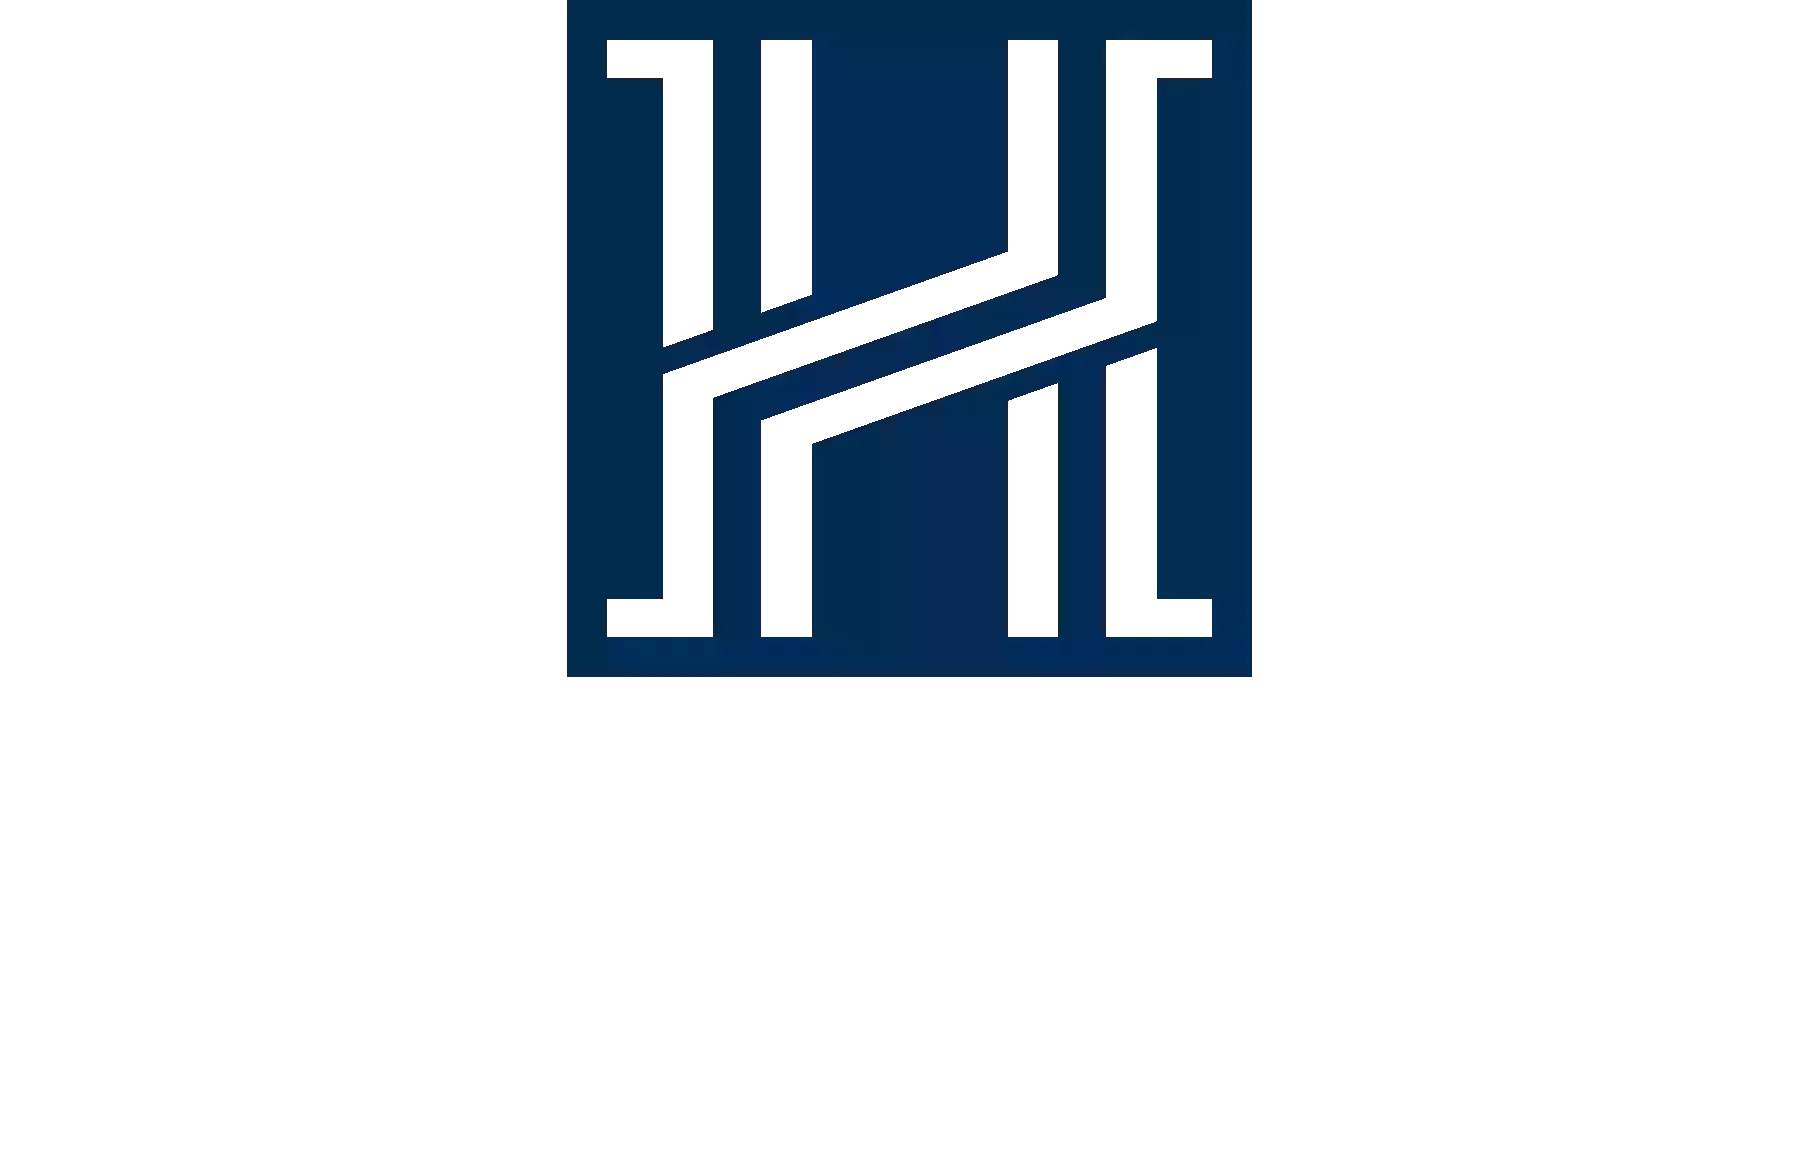 PDH Hall Attorneys at Law LLC and PDH Hall Title LLC